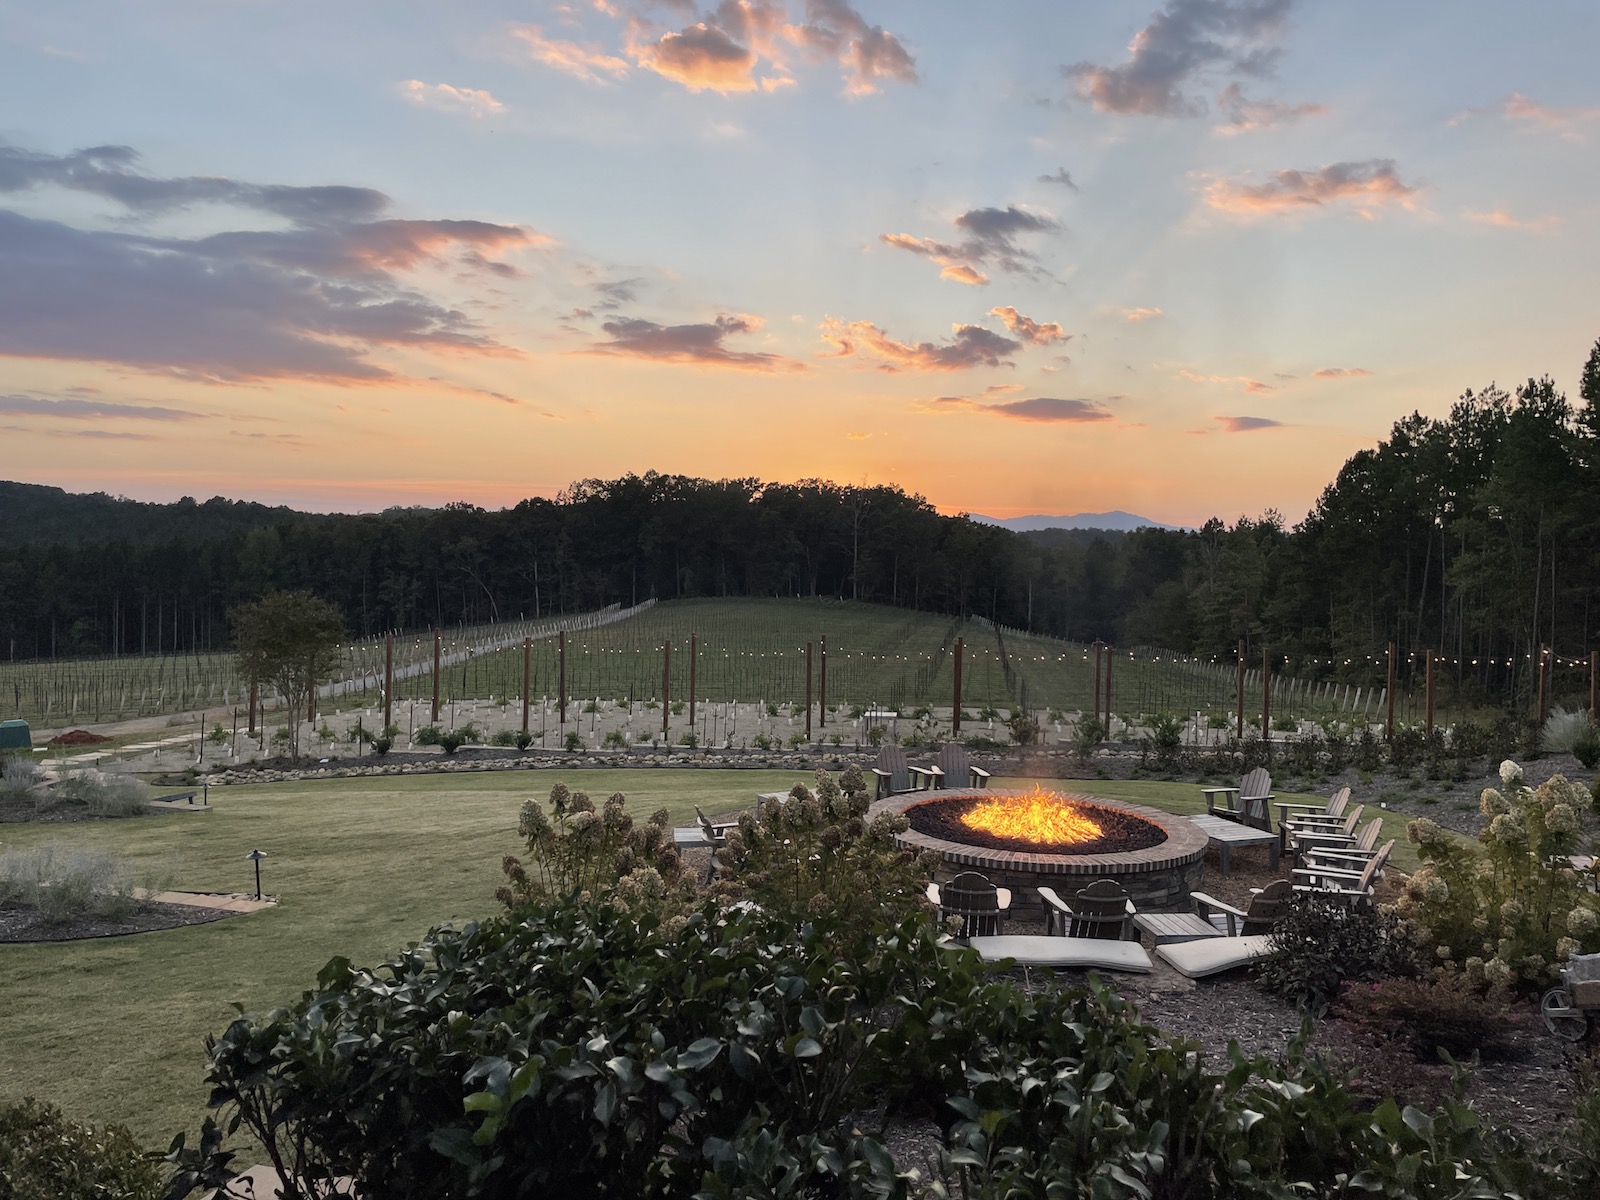 A fire blazes in a circular brick firepit with several adirondack chairs circled around it. There are rows of grapevines in the background. The sky is a beautiful orange with a couple of dark purple clouds. A small sliver of blue mountain is in the background.